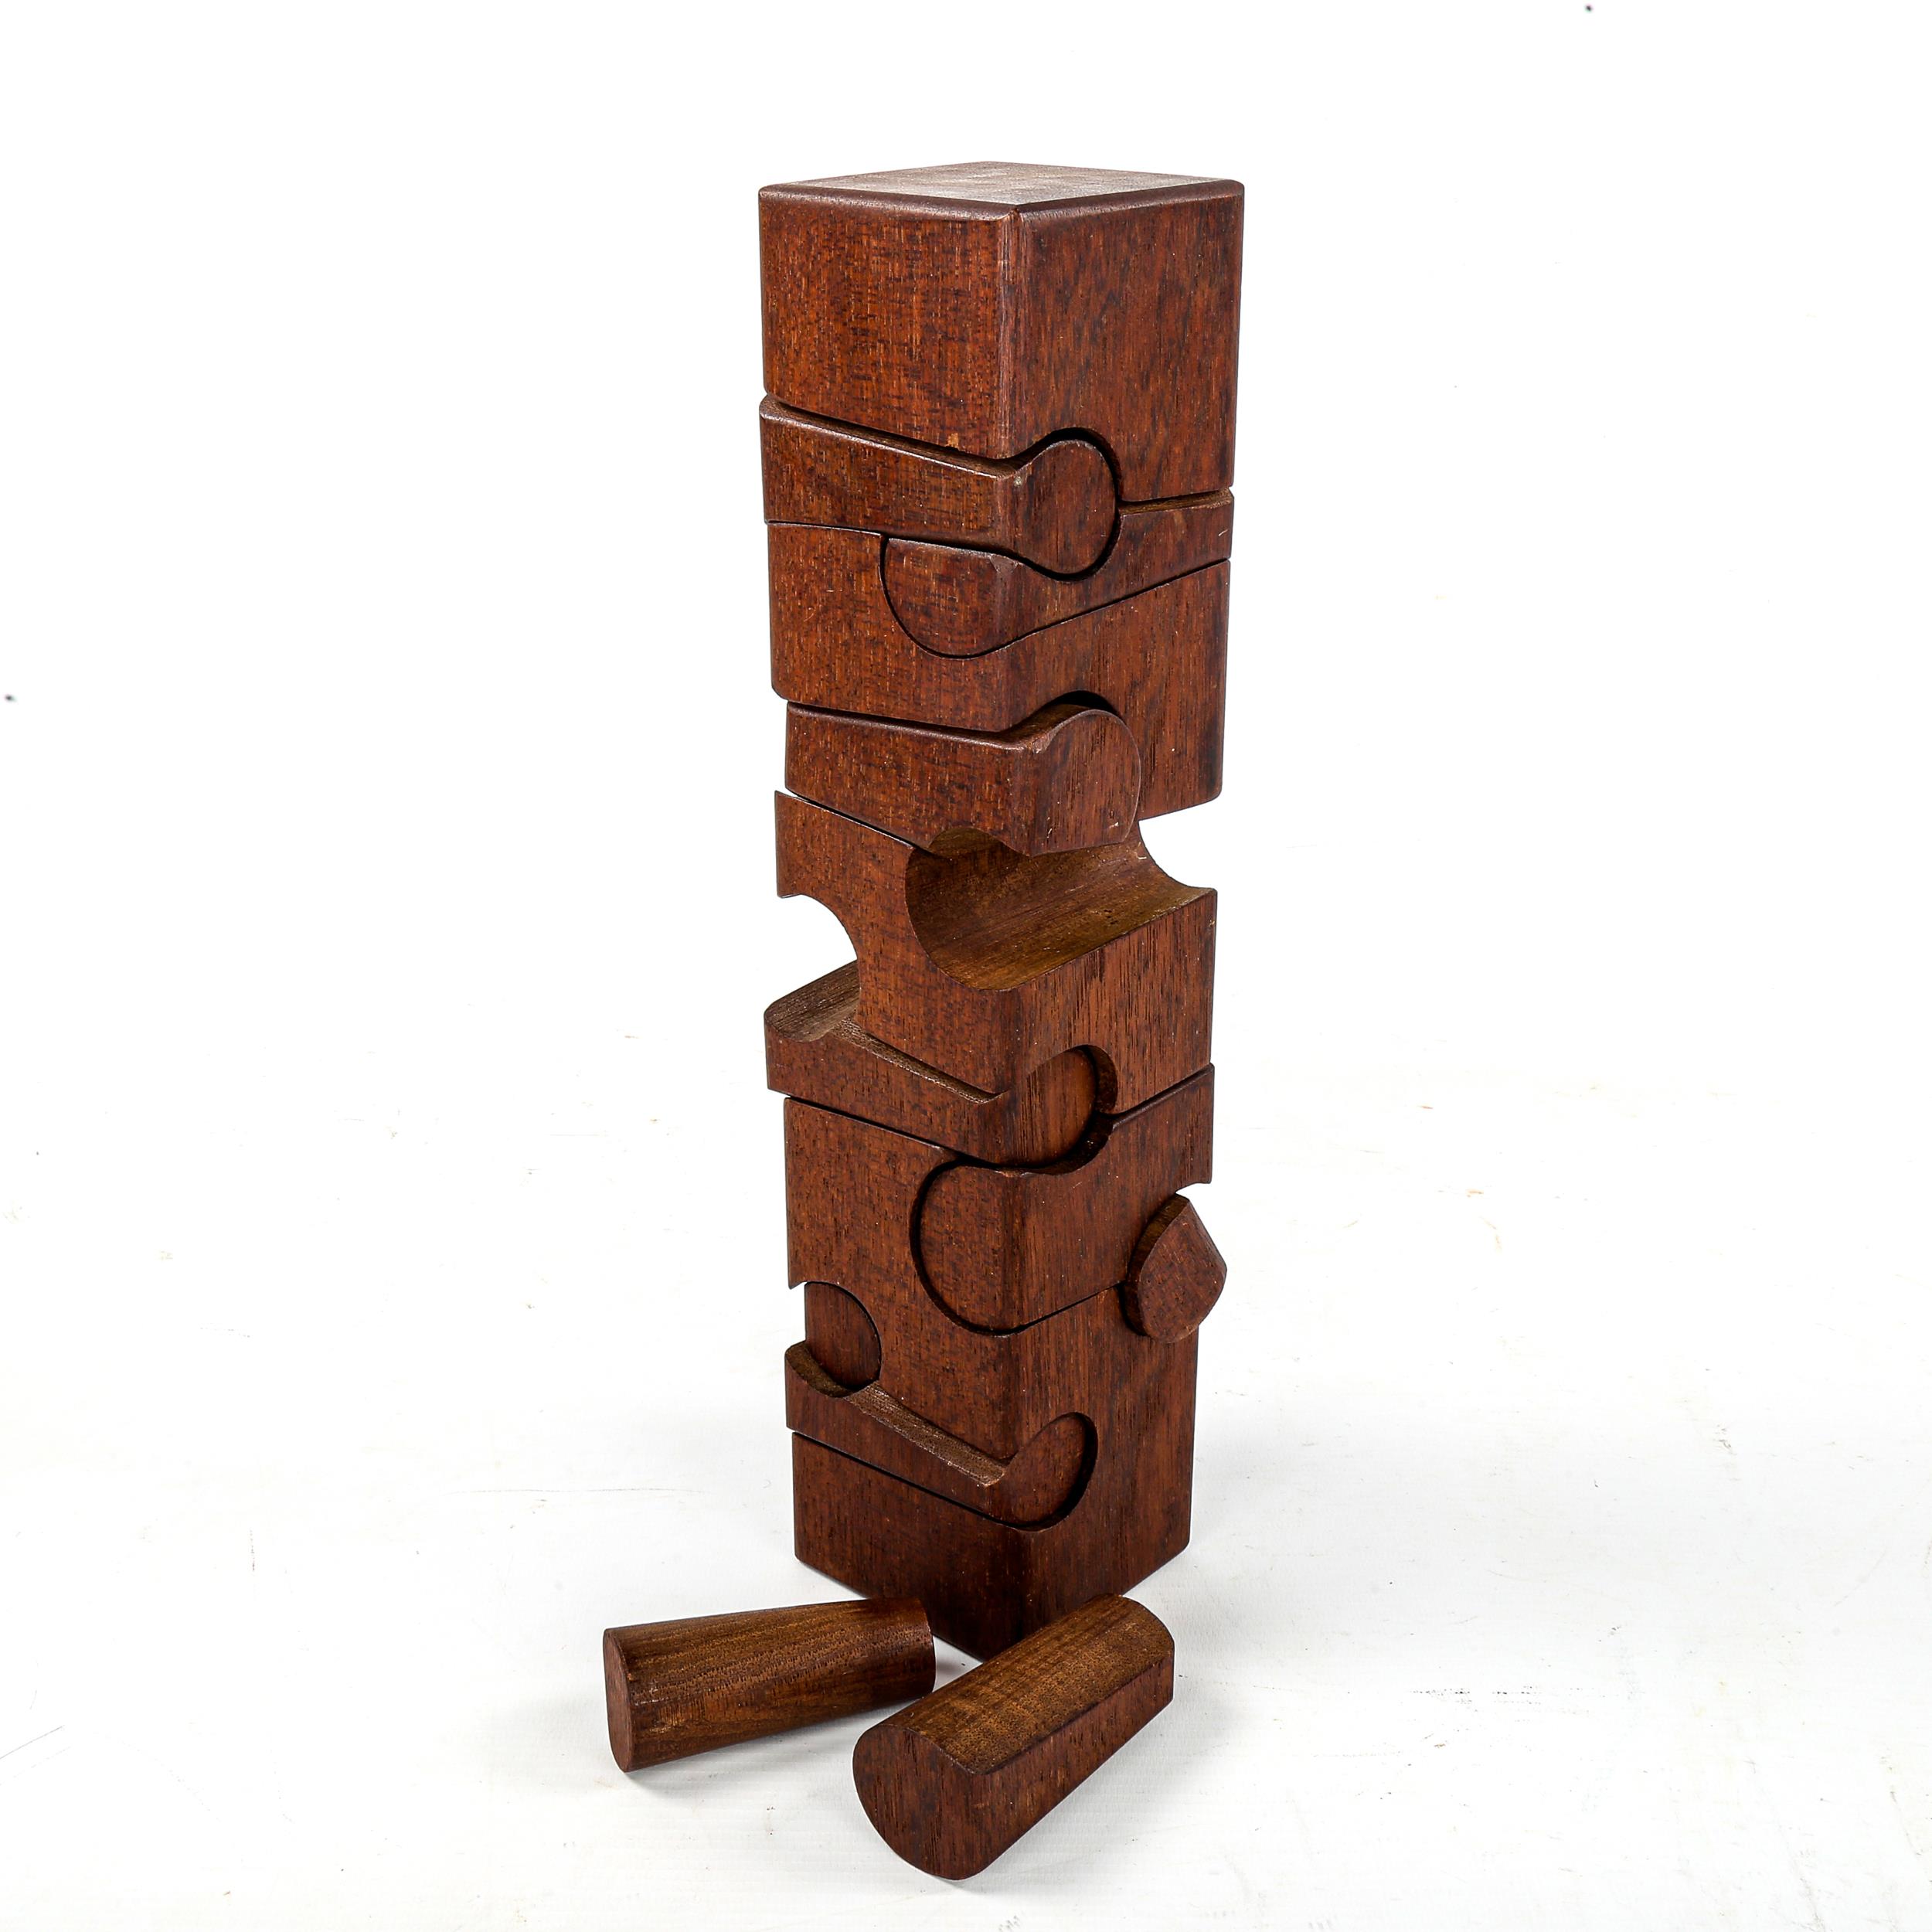 BRIAN WILLSHER, wood peg puzzle sculpture, height 33CM Good condition, pegs are loose in sculpture. - Image 3 of 4